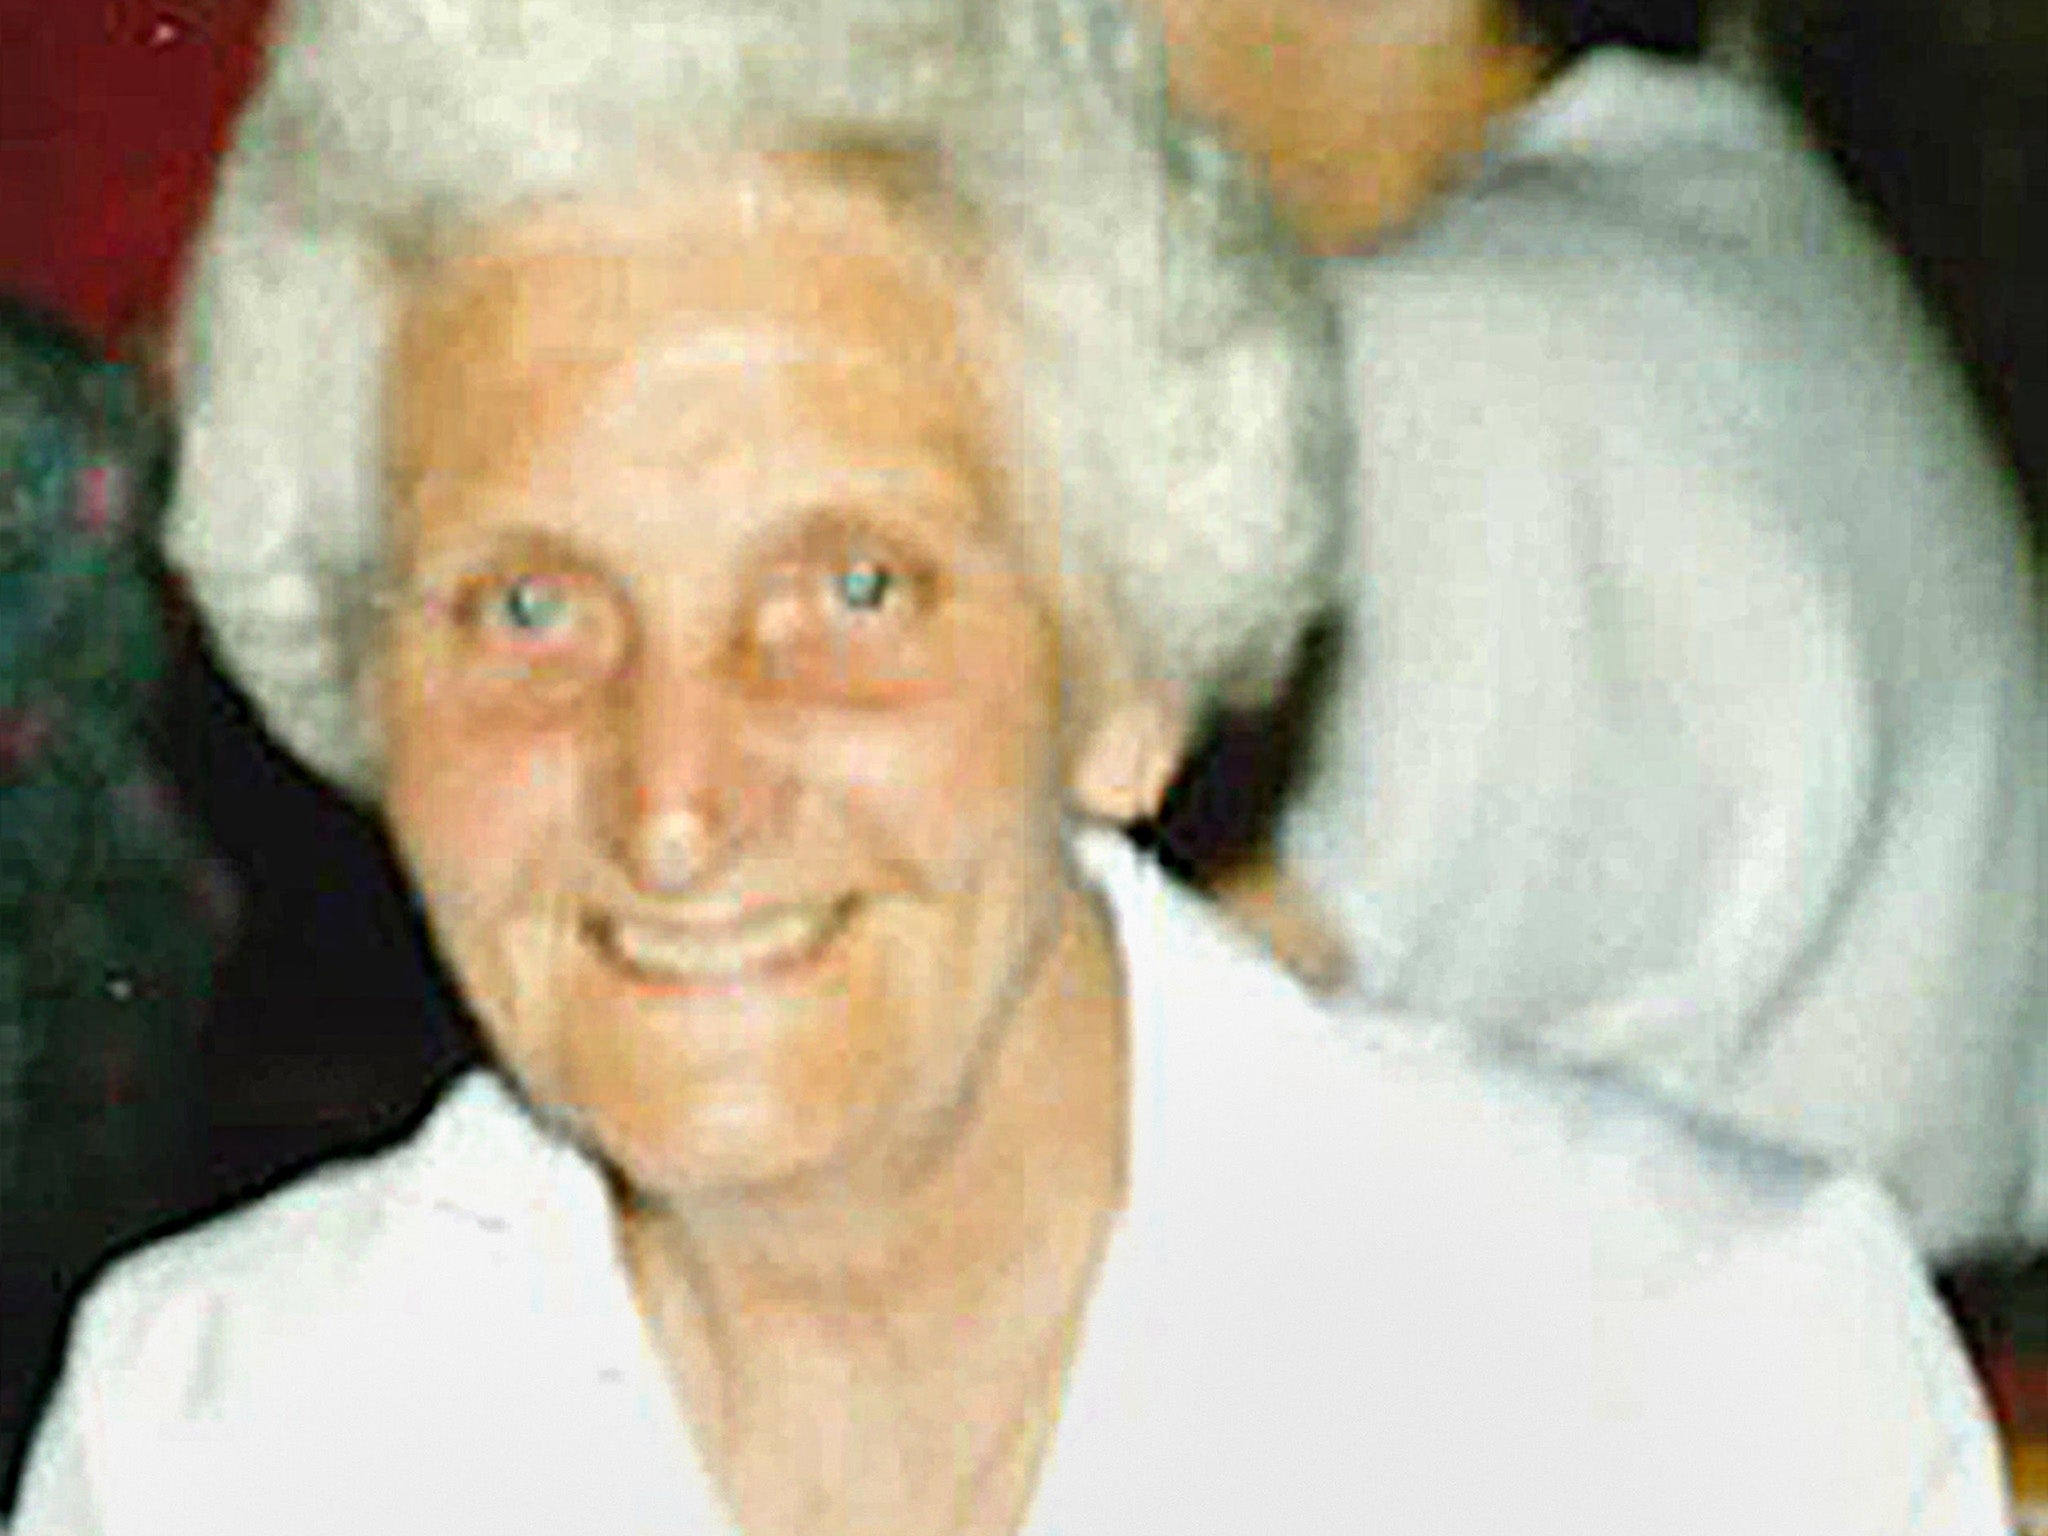 Ivy Atkin, 86, who died from pneumonia, brought about by "wanton and reckless neglect"